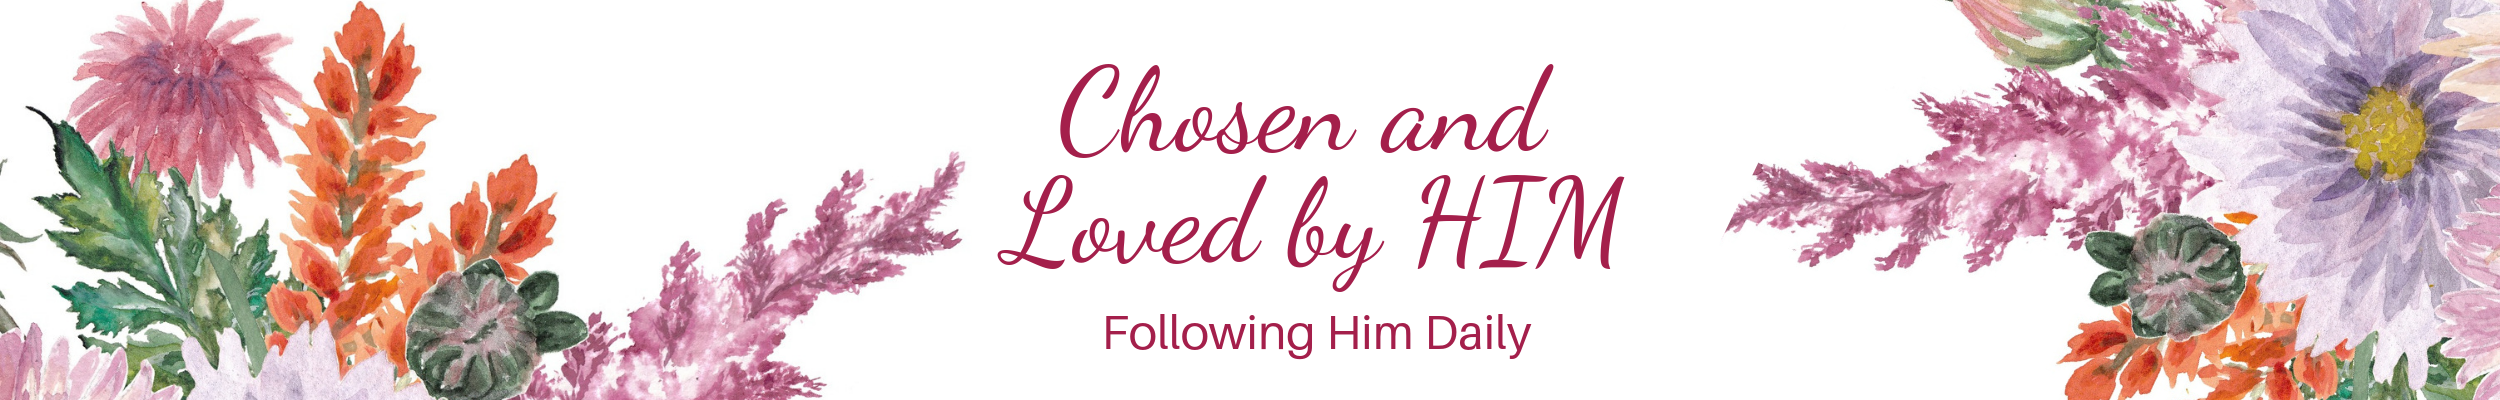 Chosen and Loved by Him